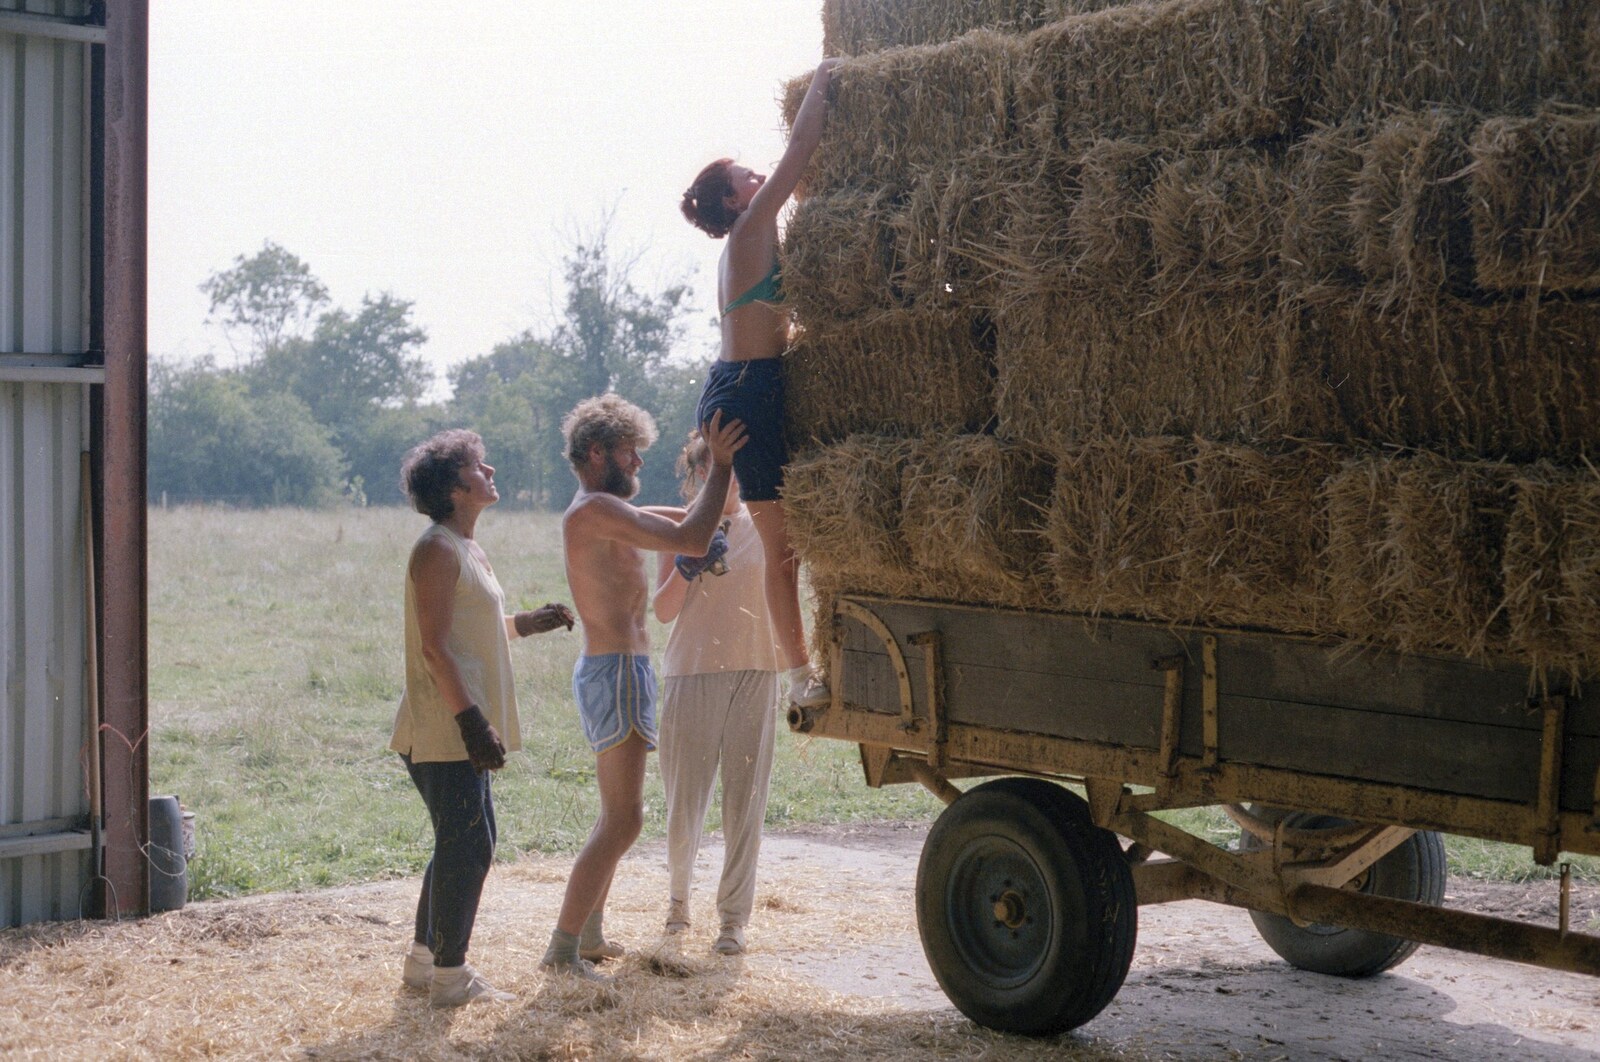 Working on the Harvest, Tibenham, Norfolk - 11th August 1992: Another climb to the top